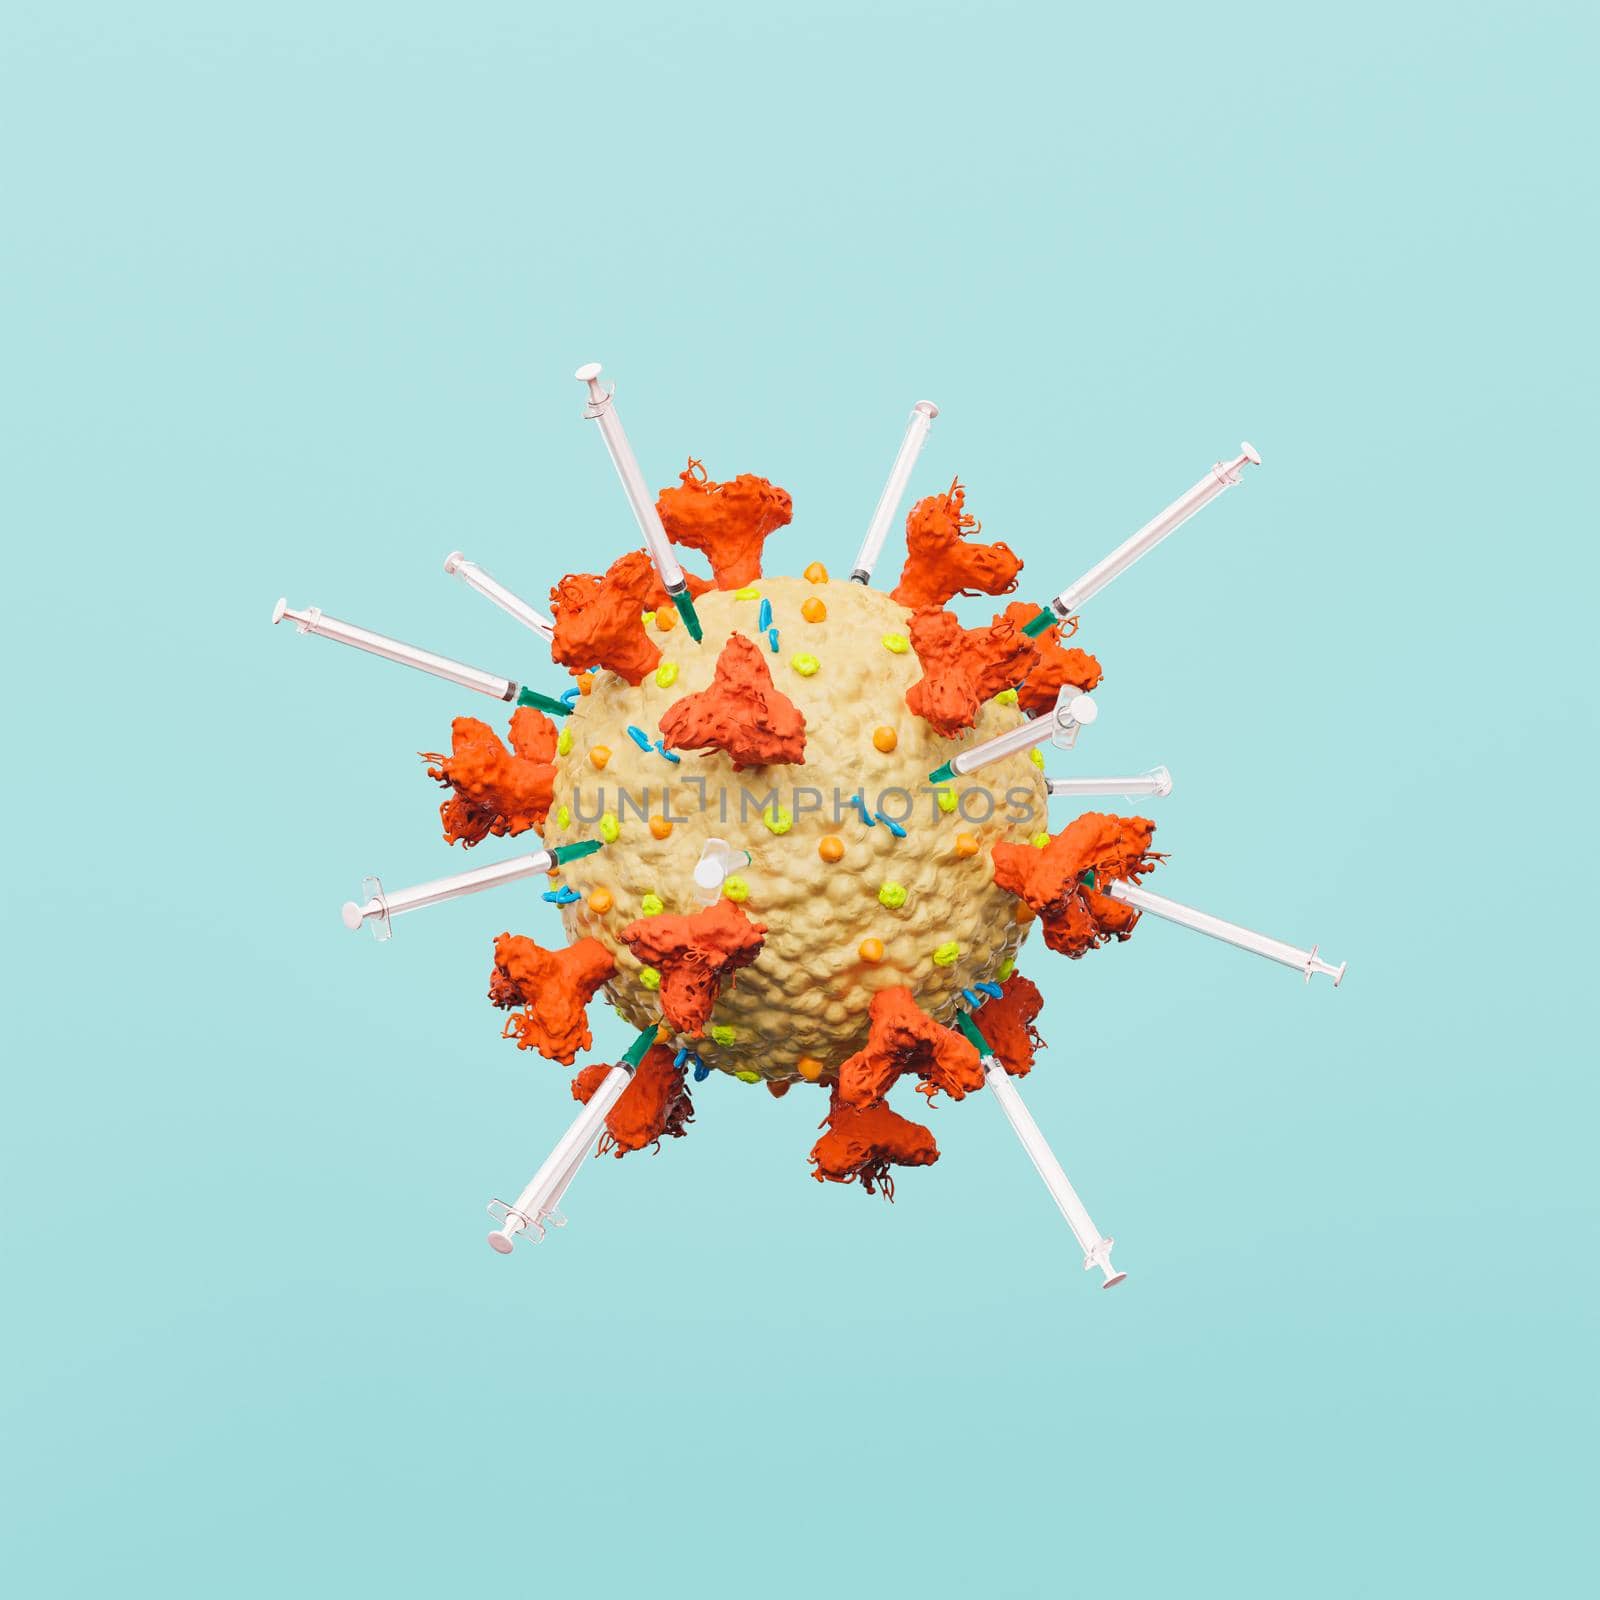 syringes injected into a virus cell by asolano